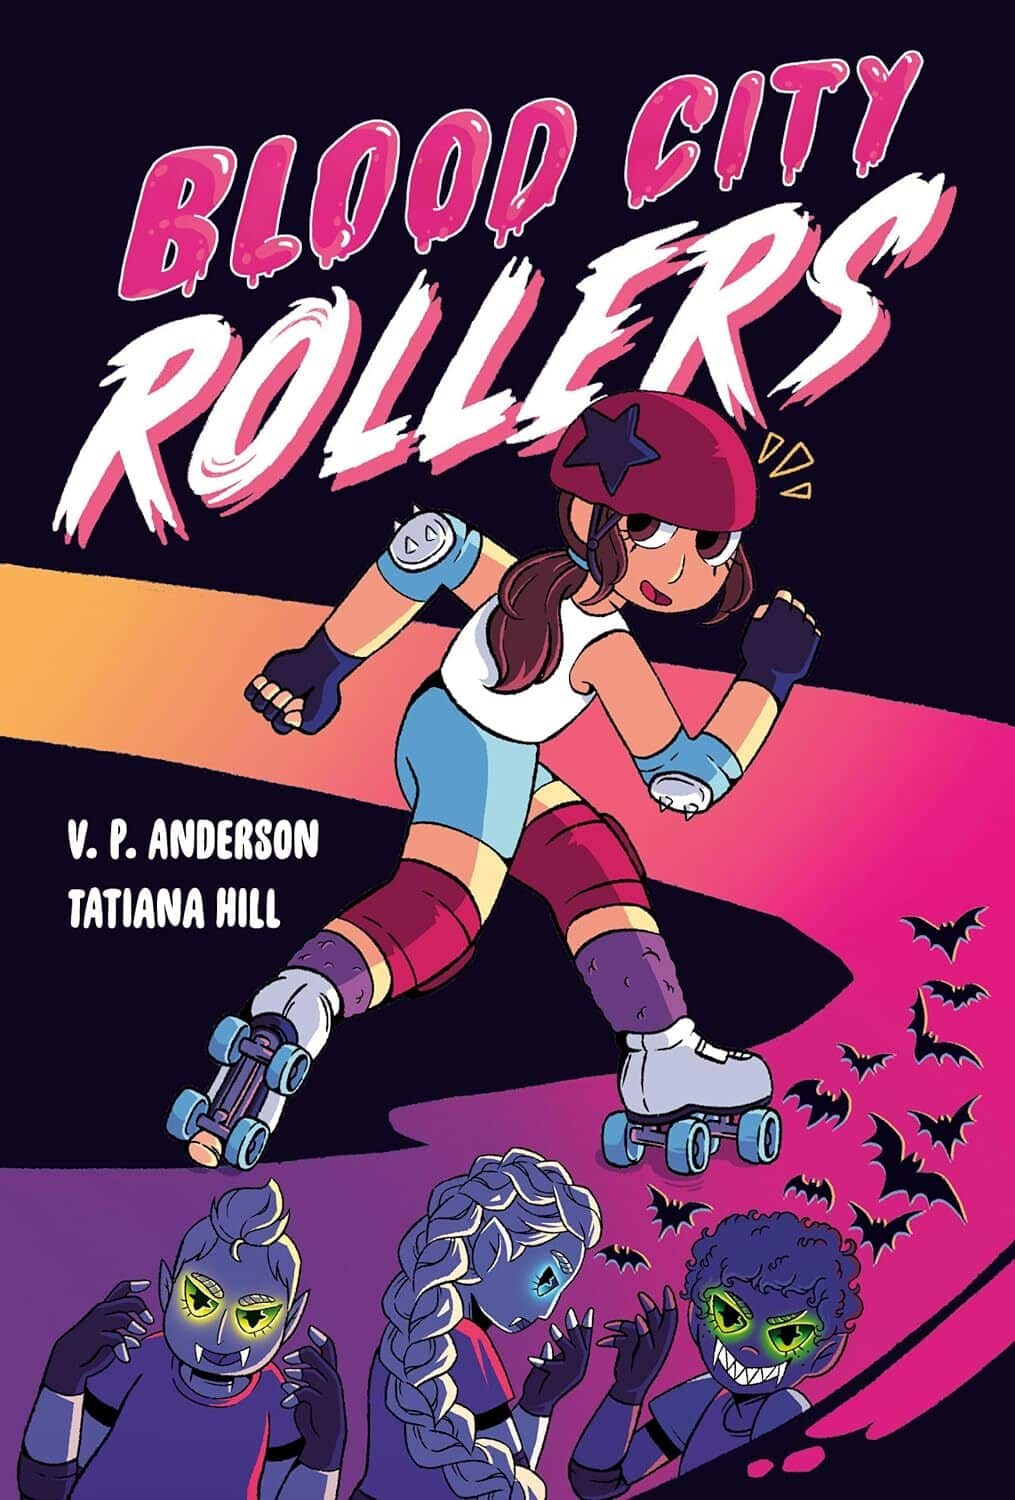 Hill Anderson, BLOOD CITY ROLLERS